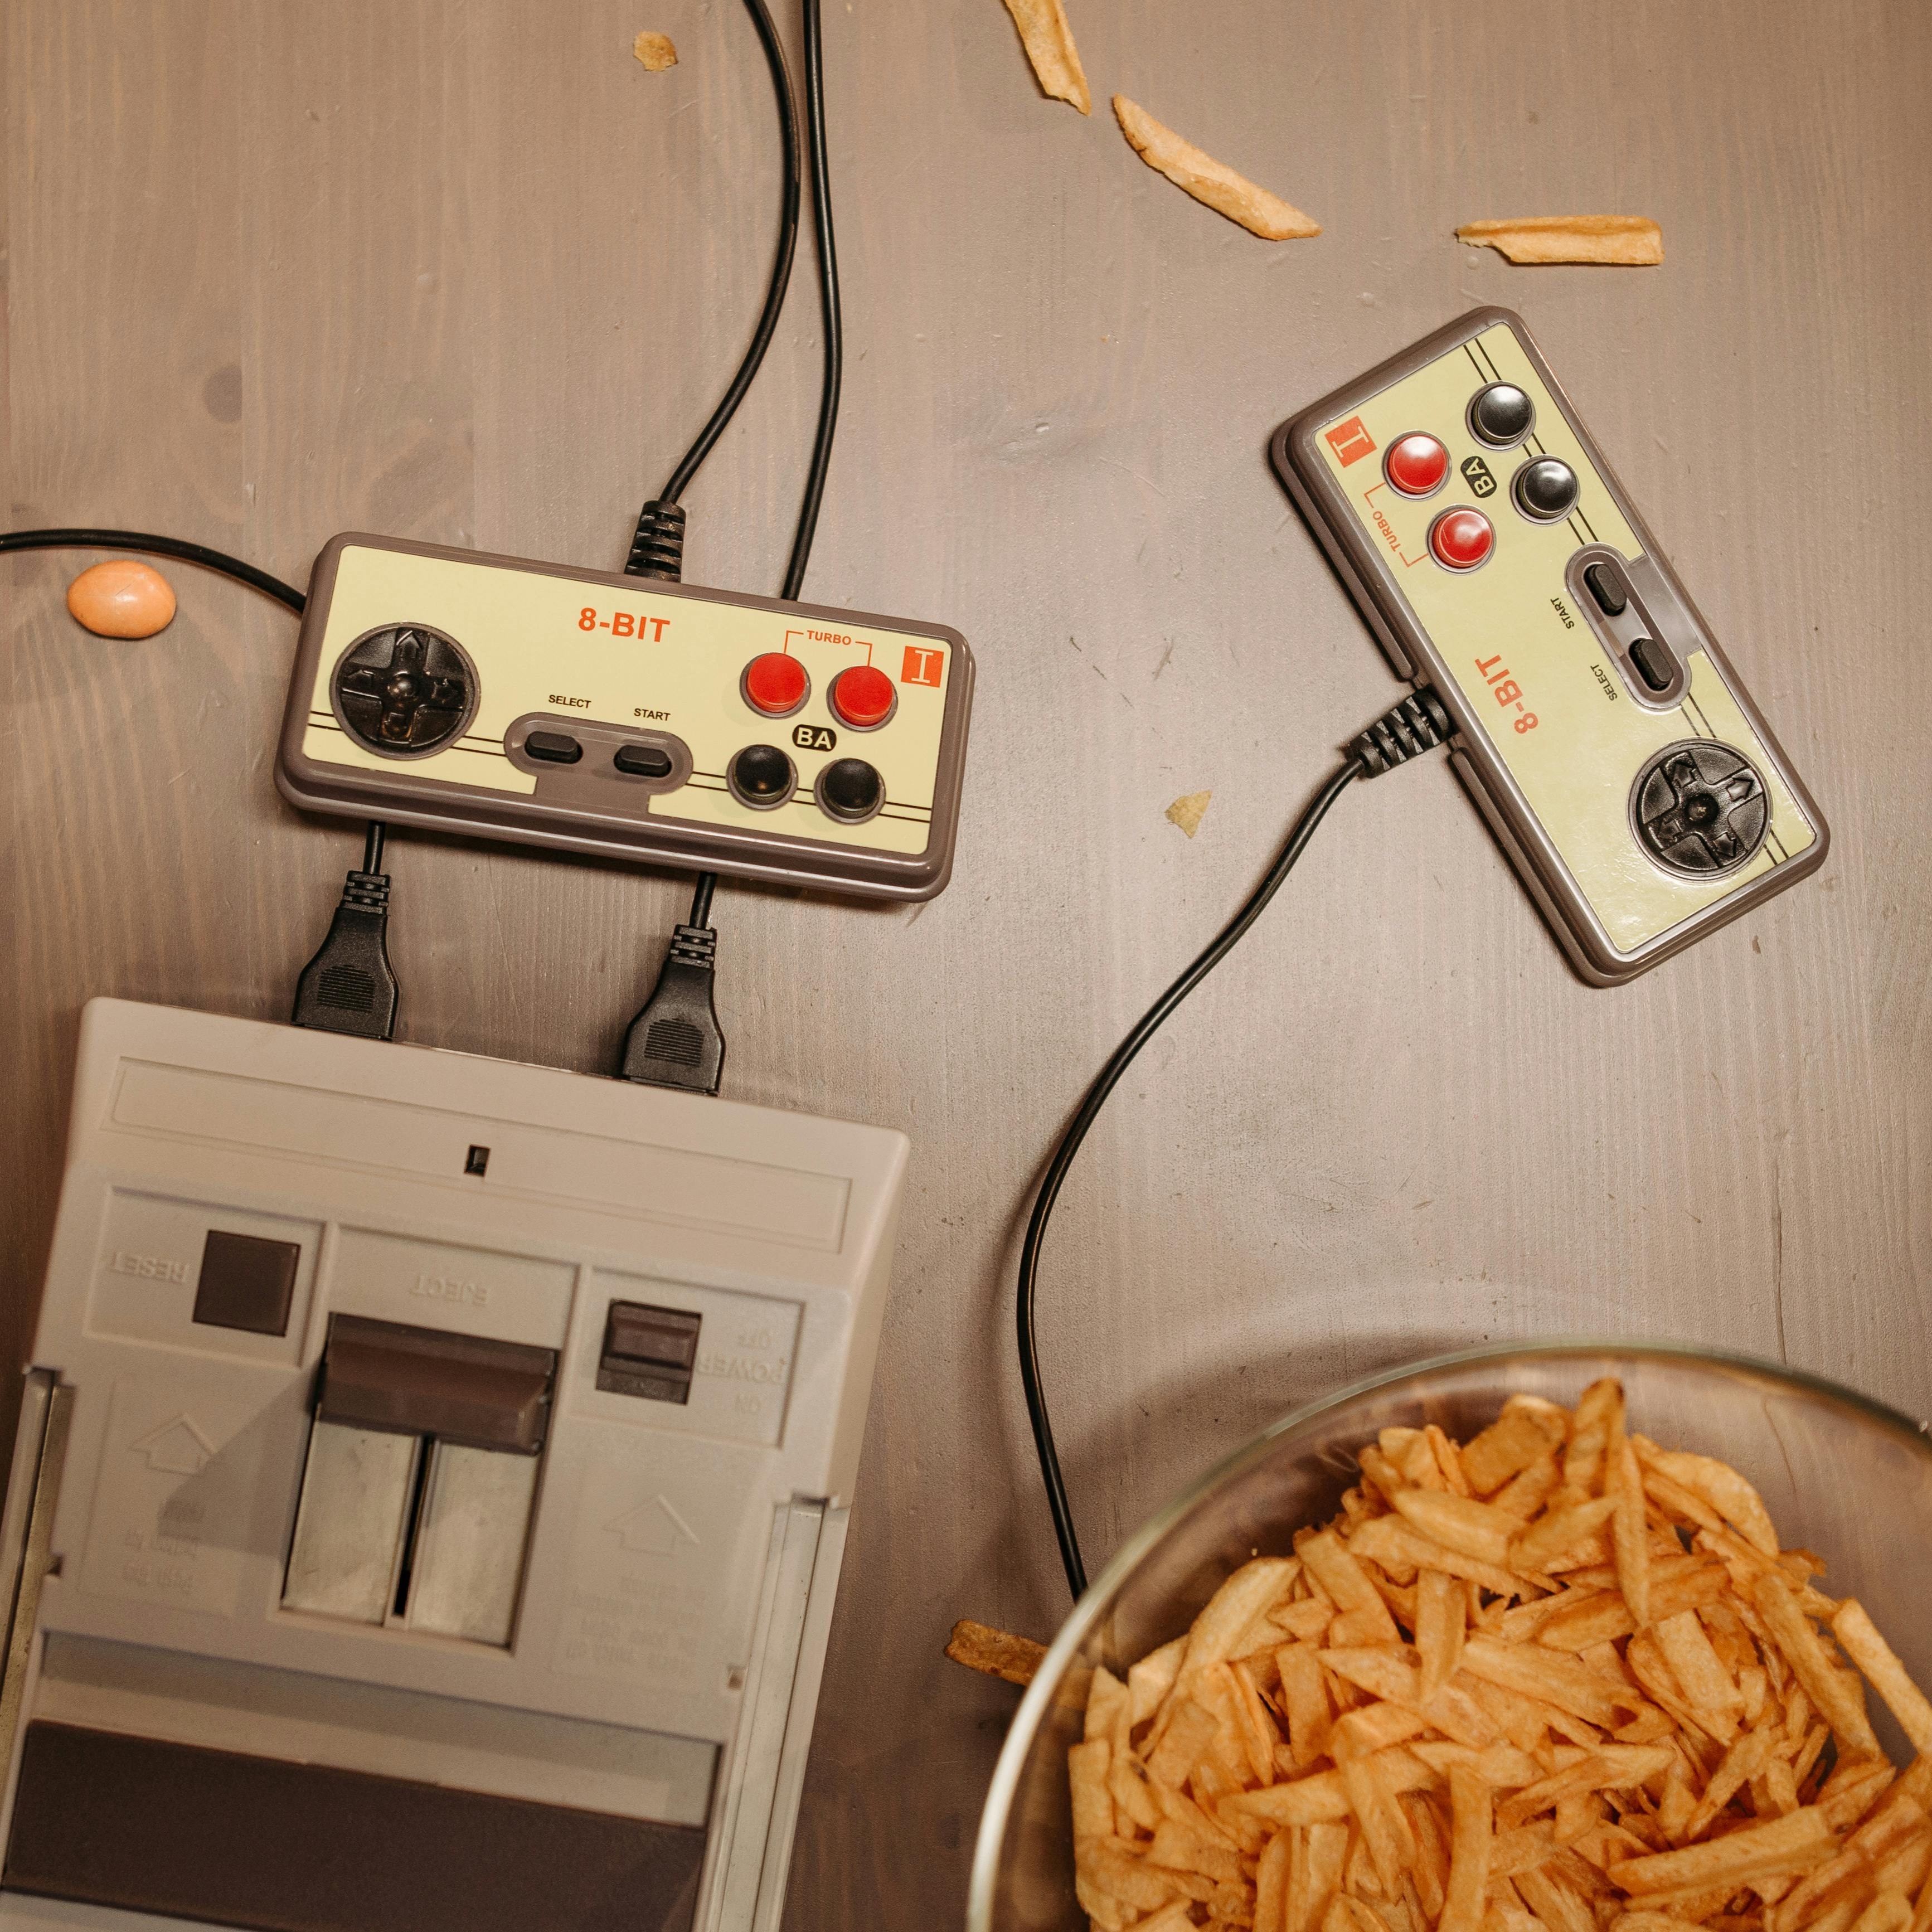 The image shows an old school gaming system with two controlers plugged in and a bowl of french fries in the bottom right corner